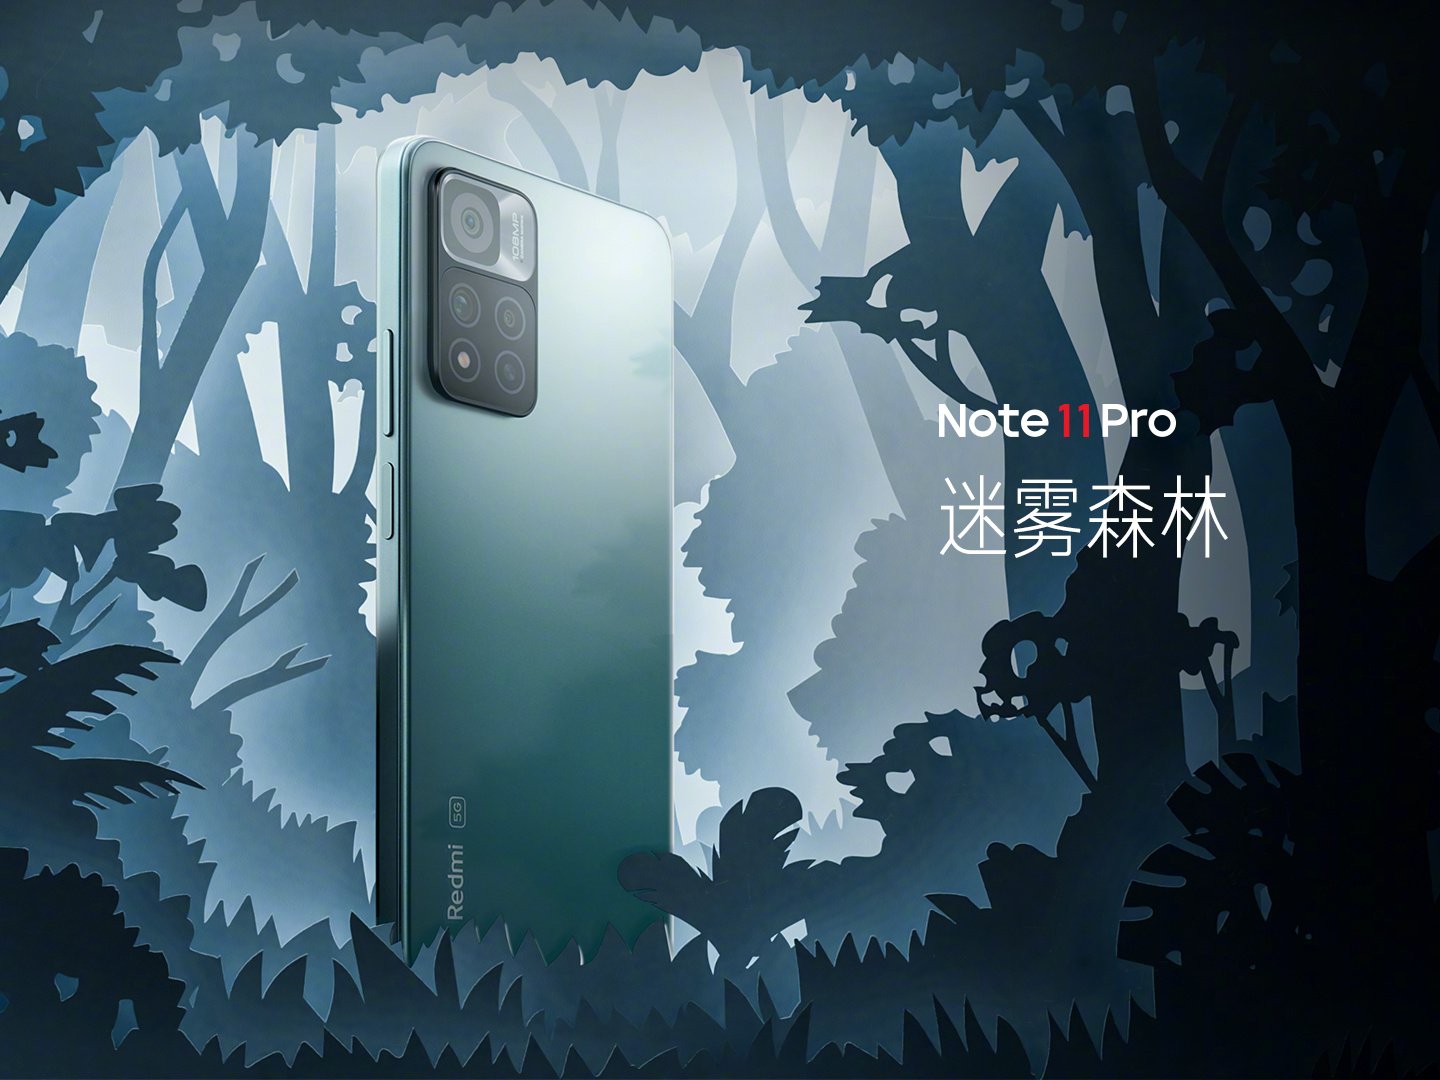 Xiaomi Reveals The Redmi Note 11 Pro With A Huge Battery 67 W Charging A 108 Mp Camera And A 1 Hz Amoled Display Notebookcheck Net News